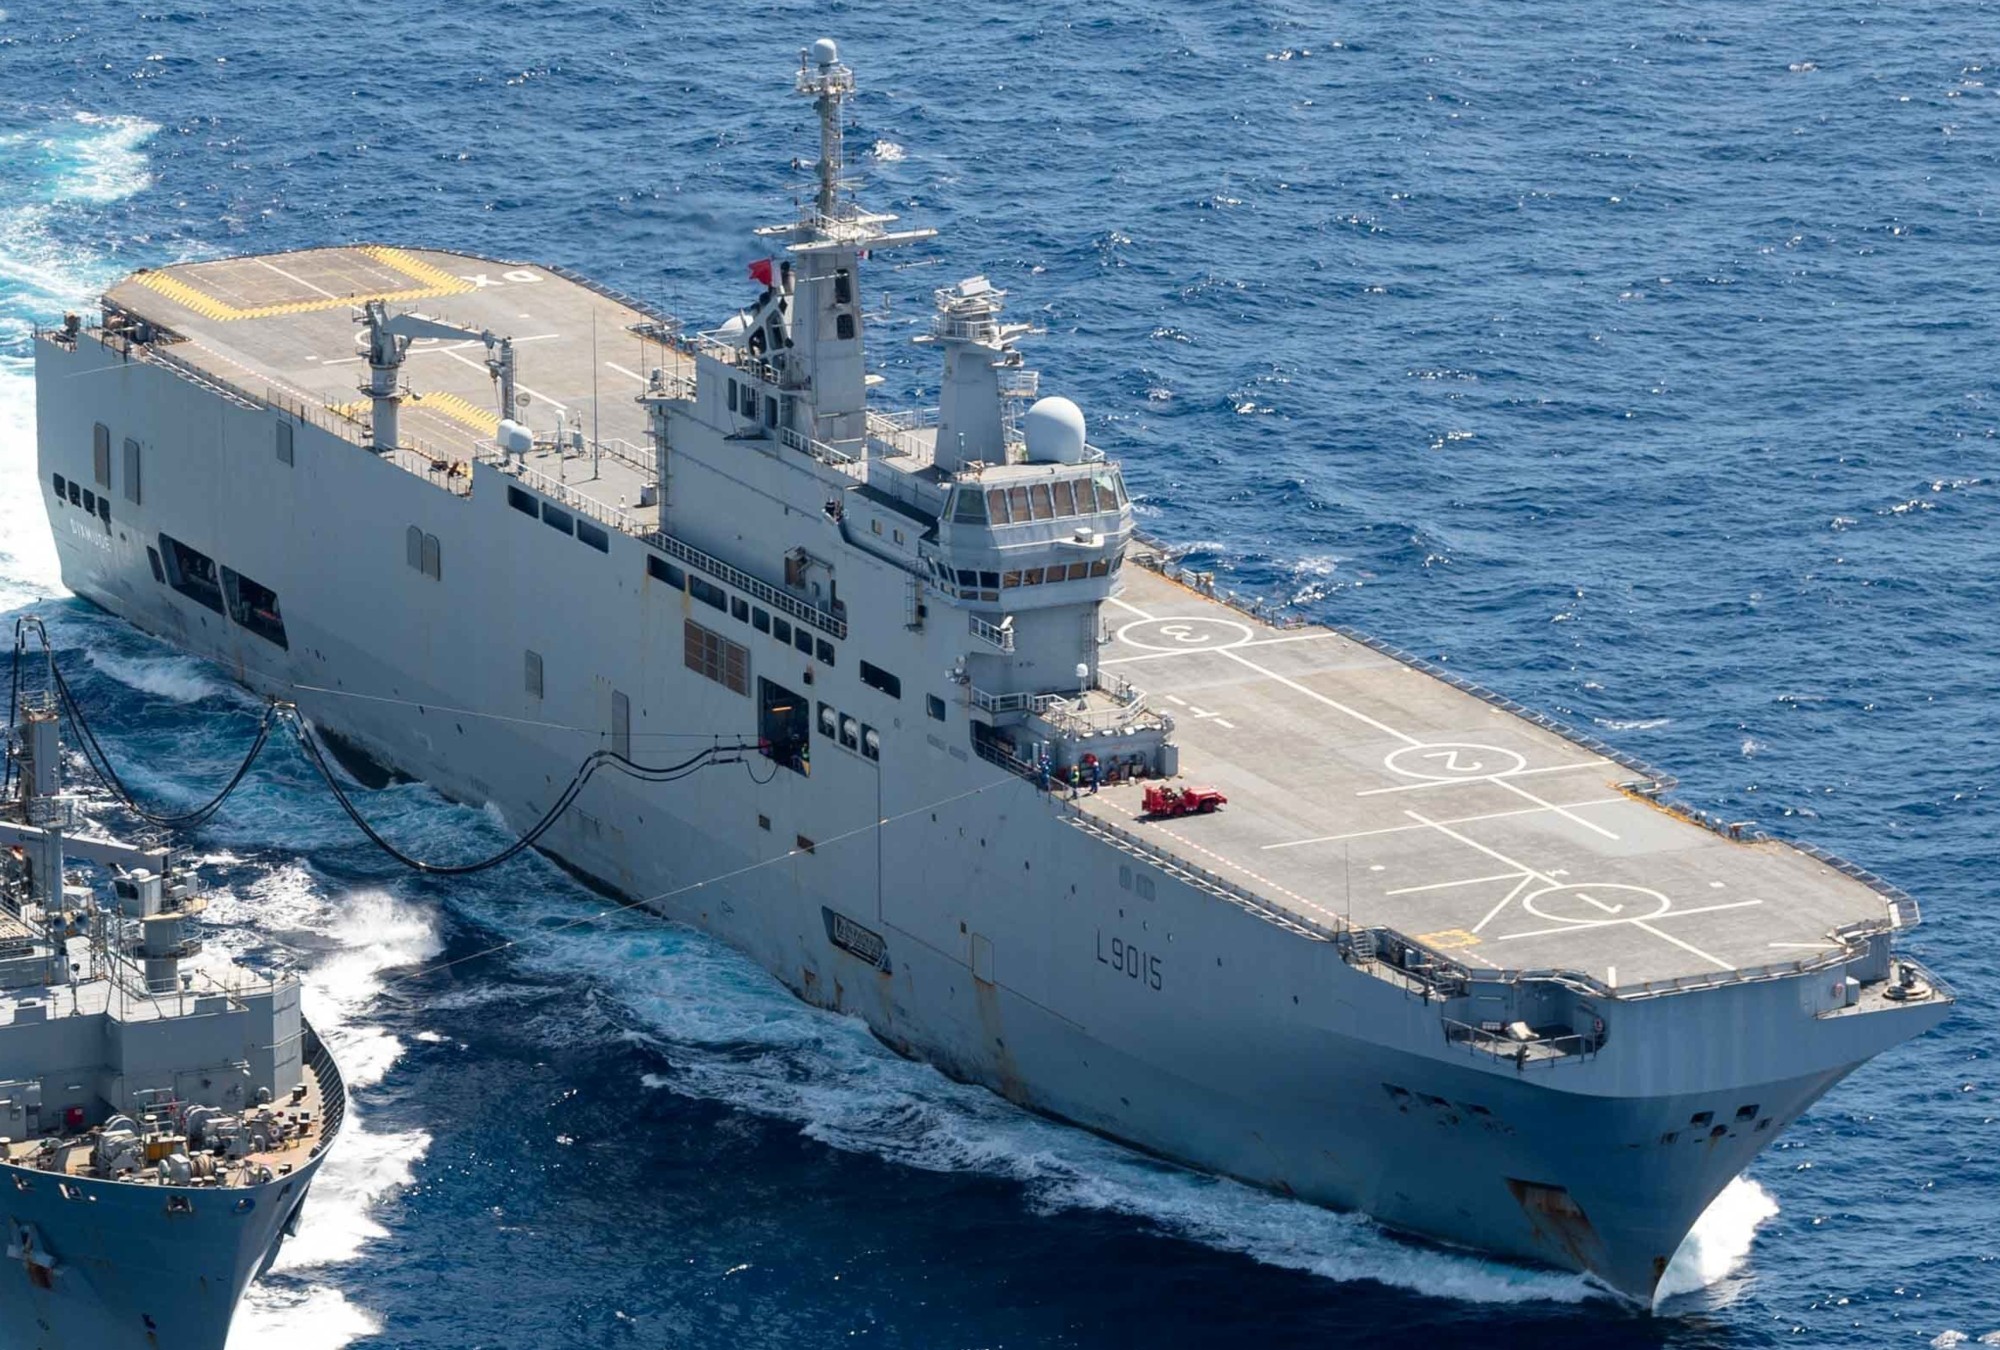 l-9015 fs dixmude mistral class amphibious assault command ship bpc french navy marine nationale 63